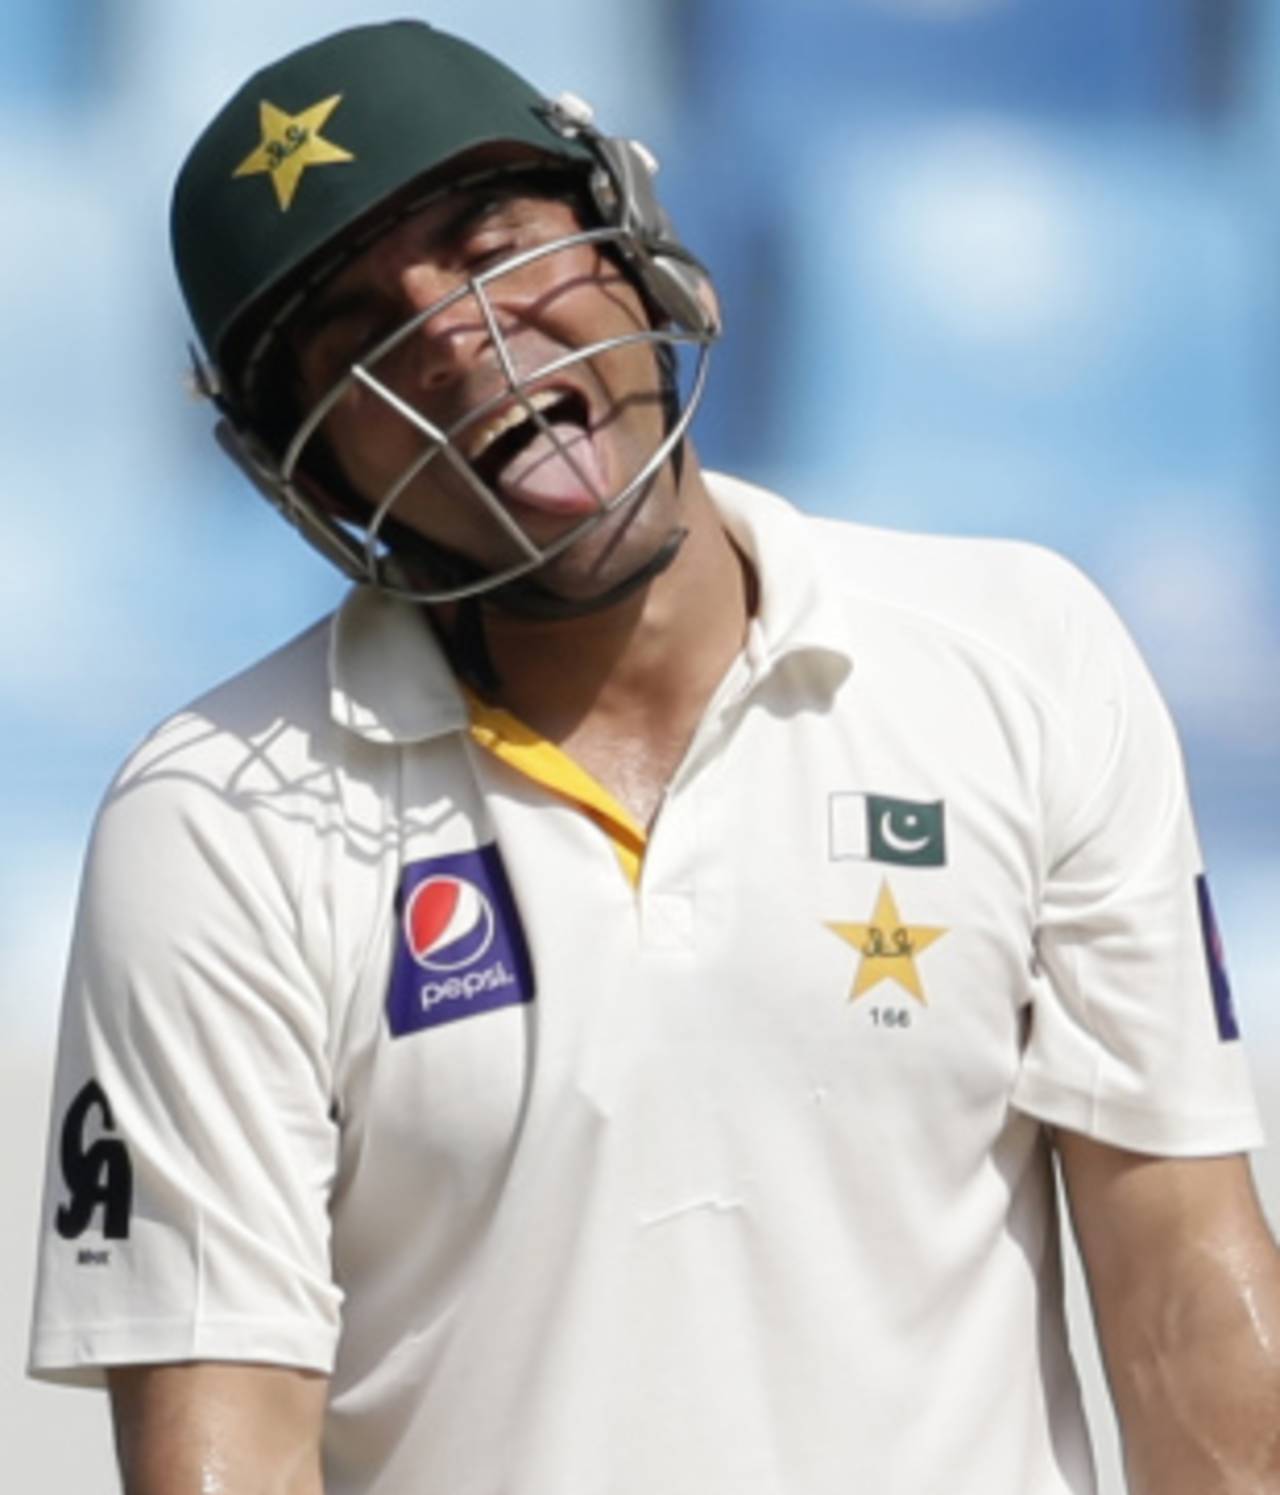 Misbah-ul-Haq reacts after missing a delivery, Pakistan v South Africa, 2nd Test, Dubai, 4th day, October 26, 2013